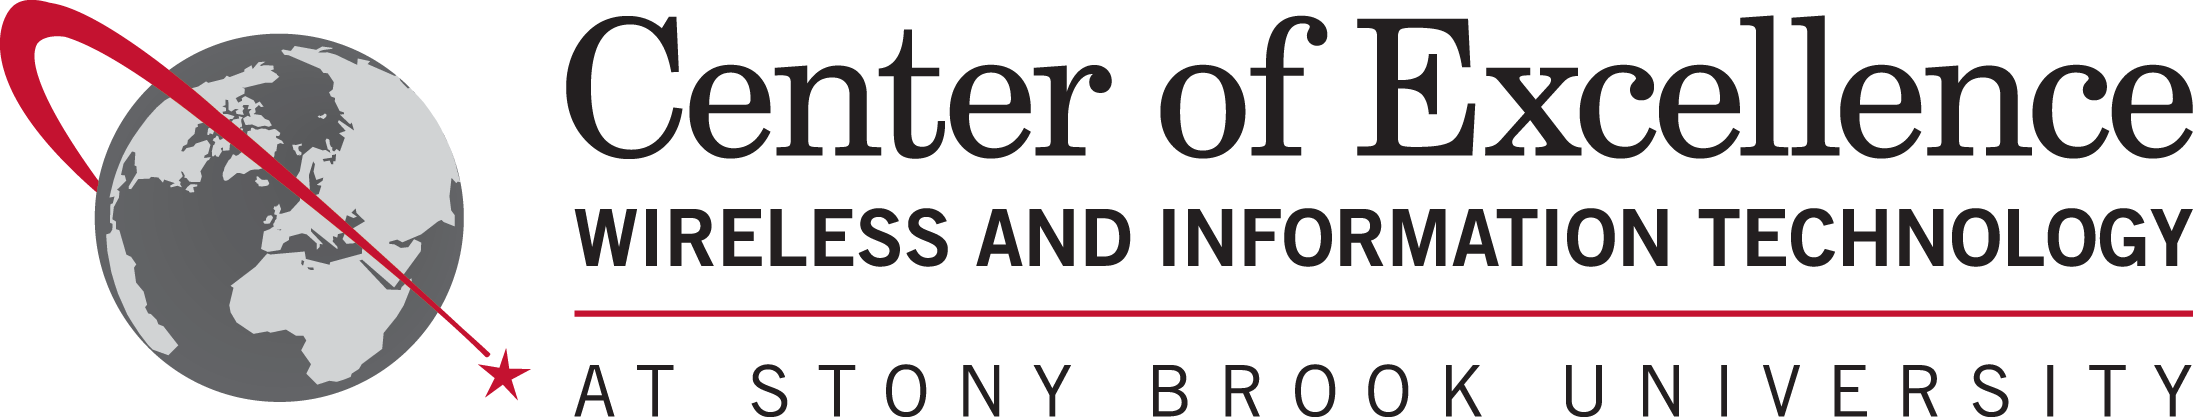 Center for Excellence in Wireless Technology at Stony Brook University logo